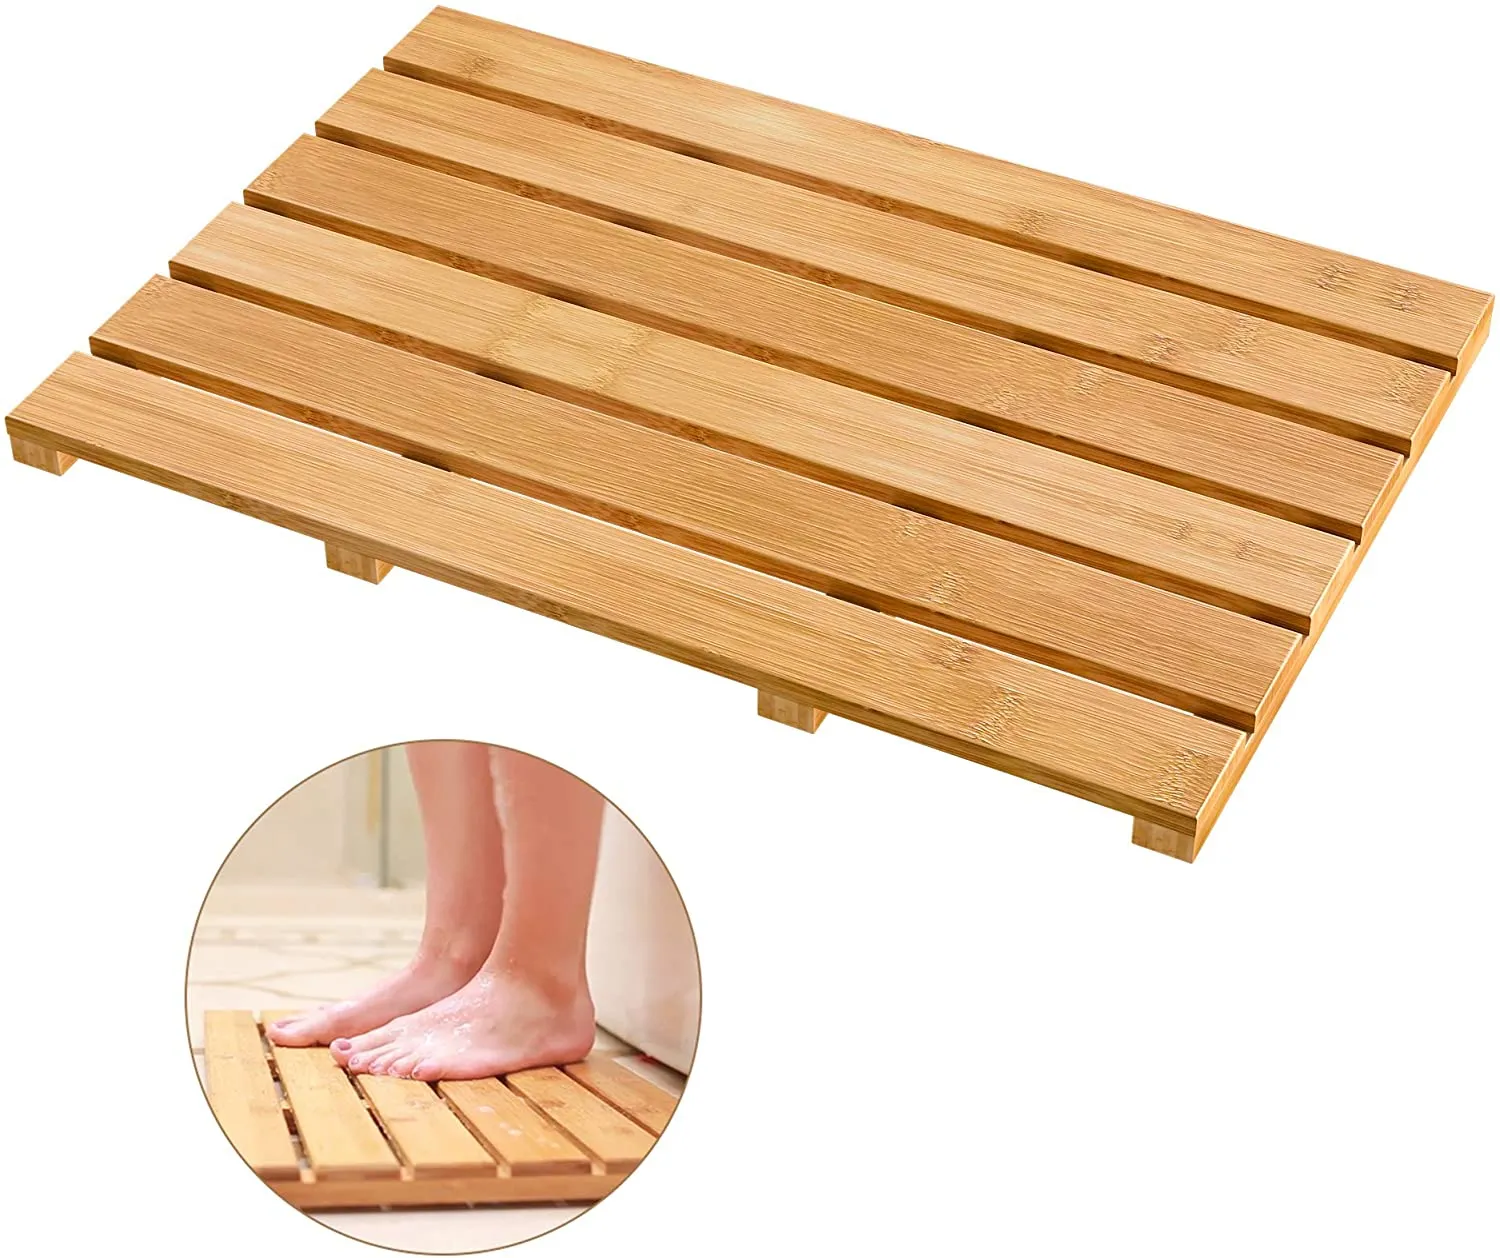 Bath Mats for Luxury Shower - Non-Slip Bamboo Sturdy Water Proof Bathroom Floor Carpet for Indoor or Outdoor Use